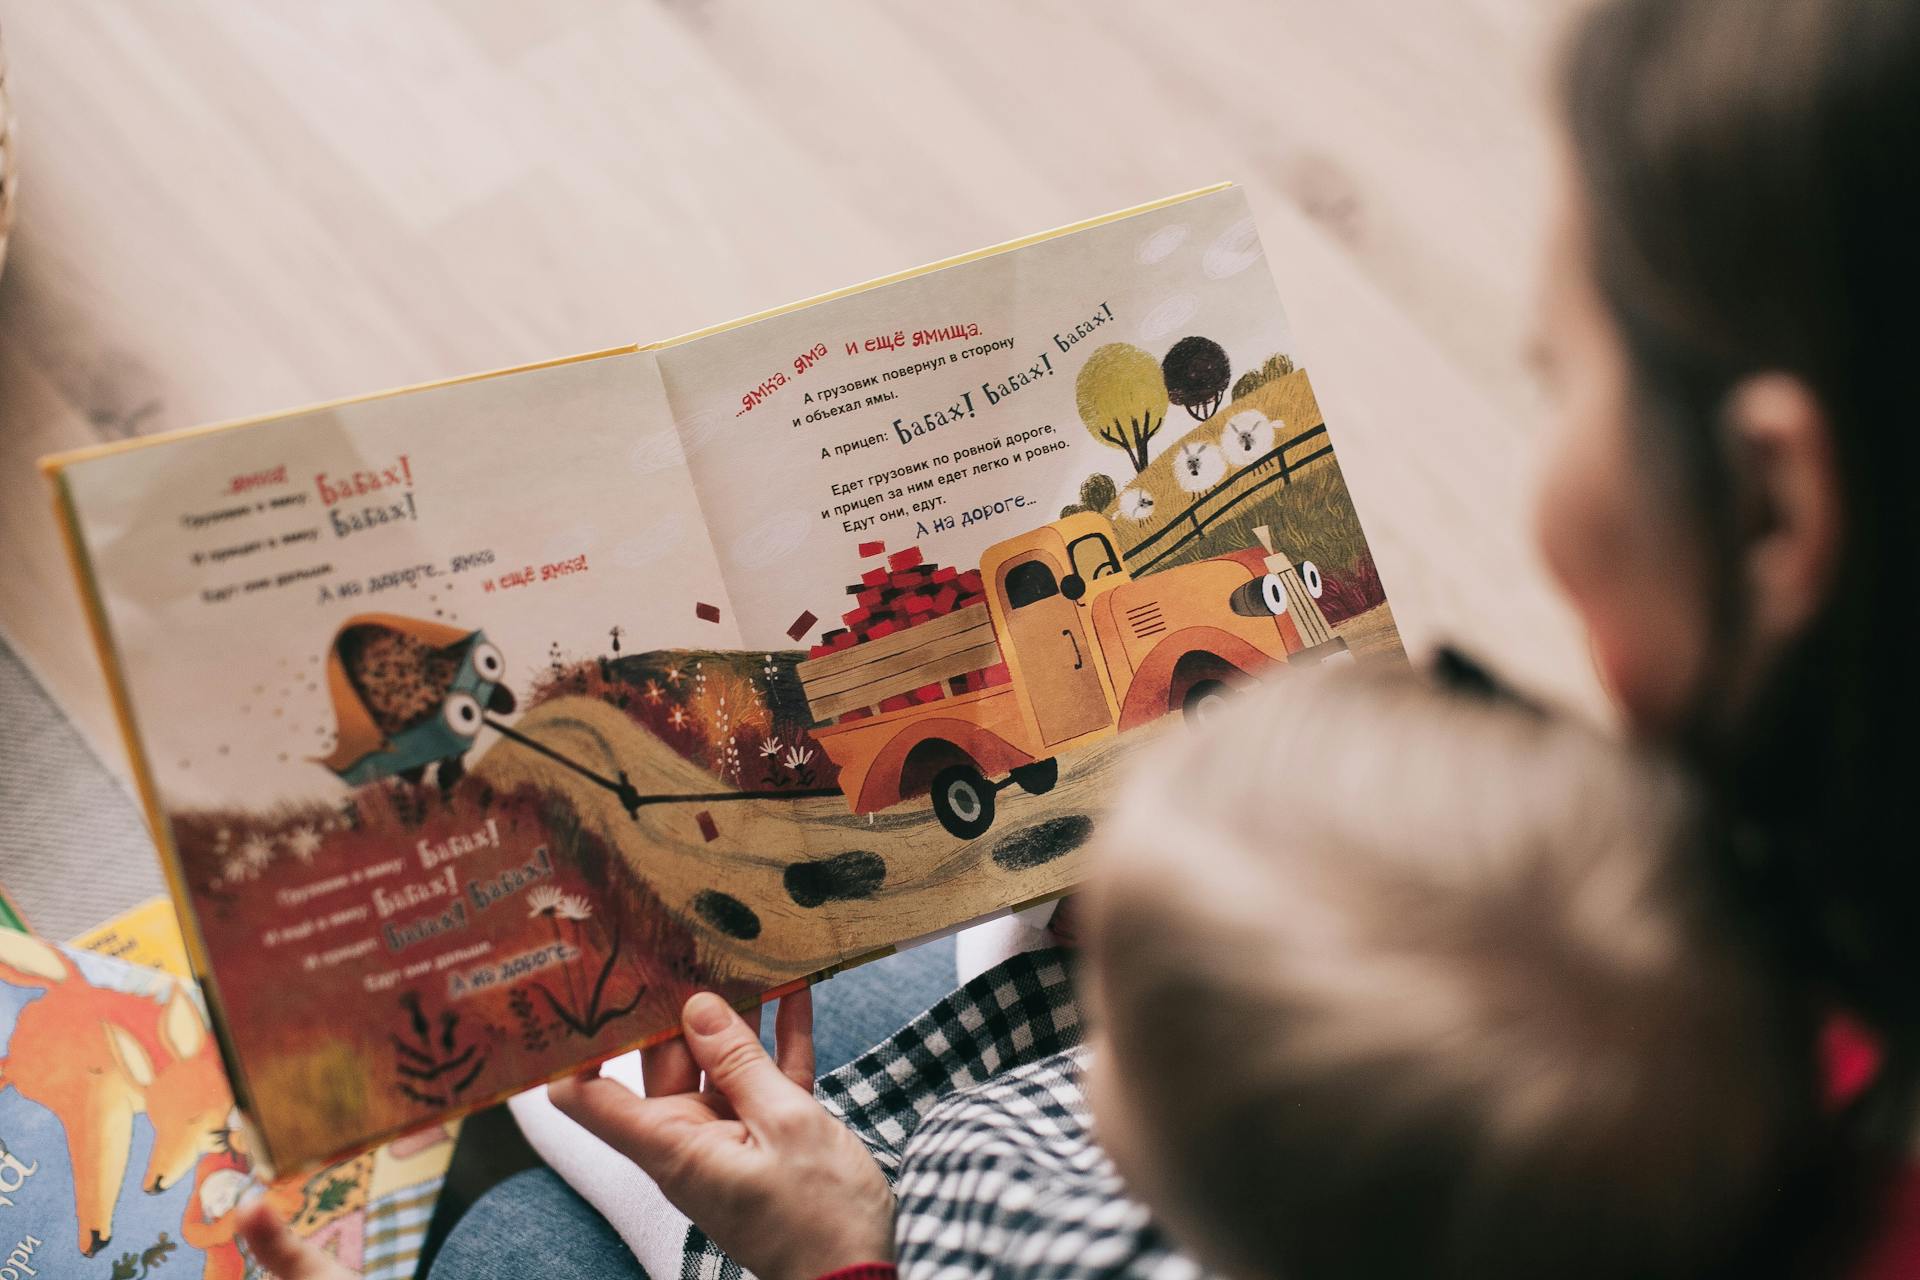 A mother reading a book to her child | Source: Pexels